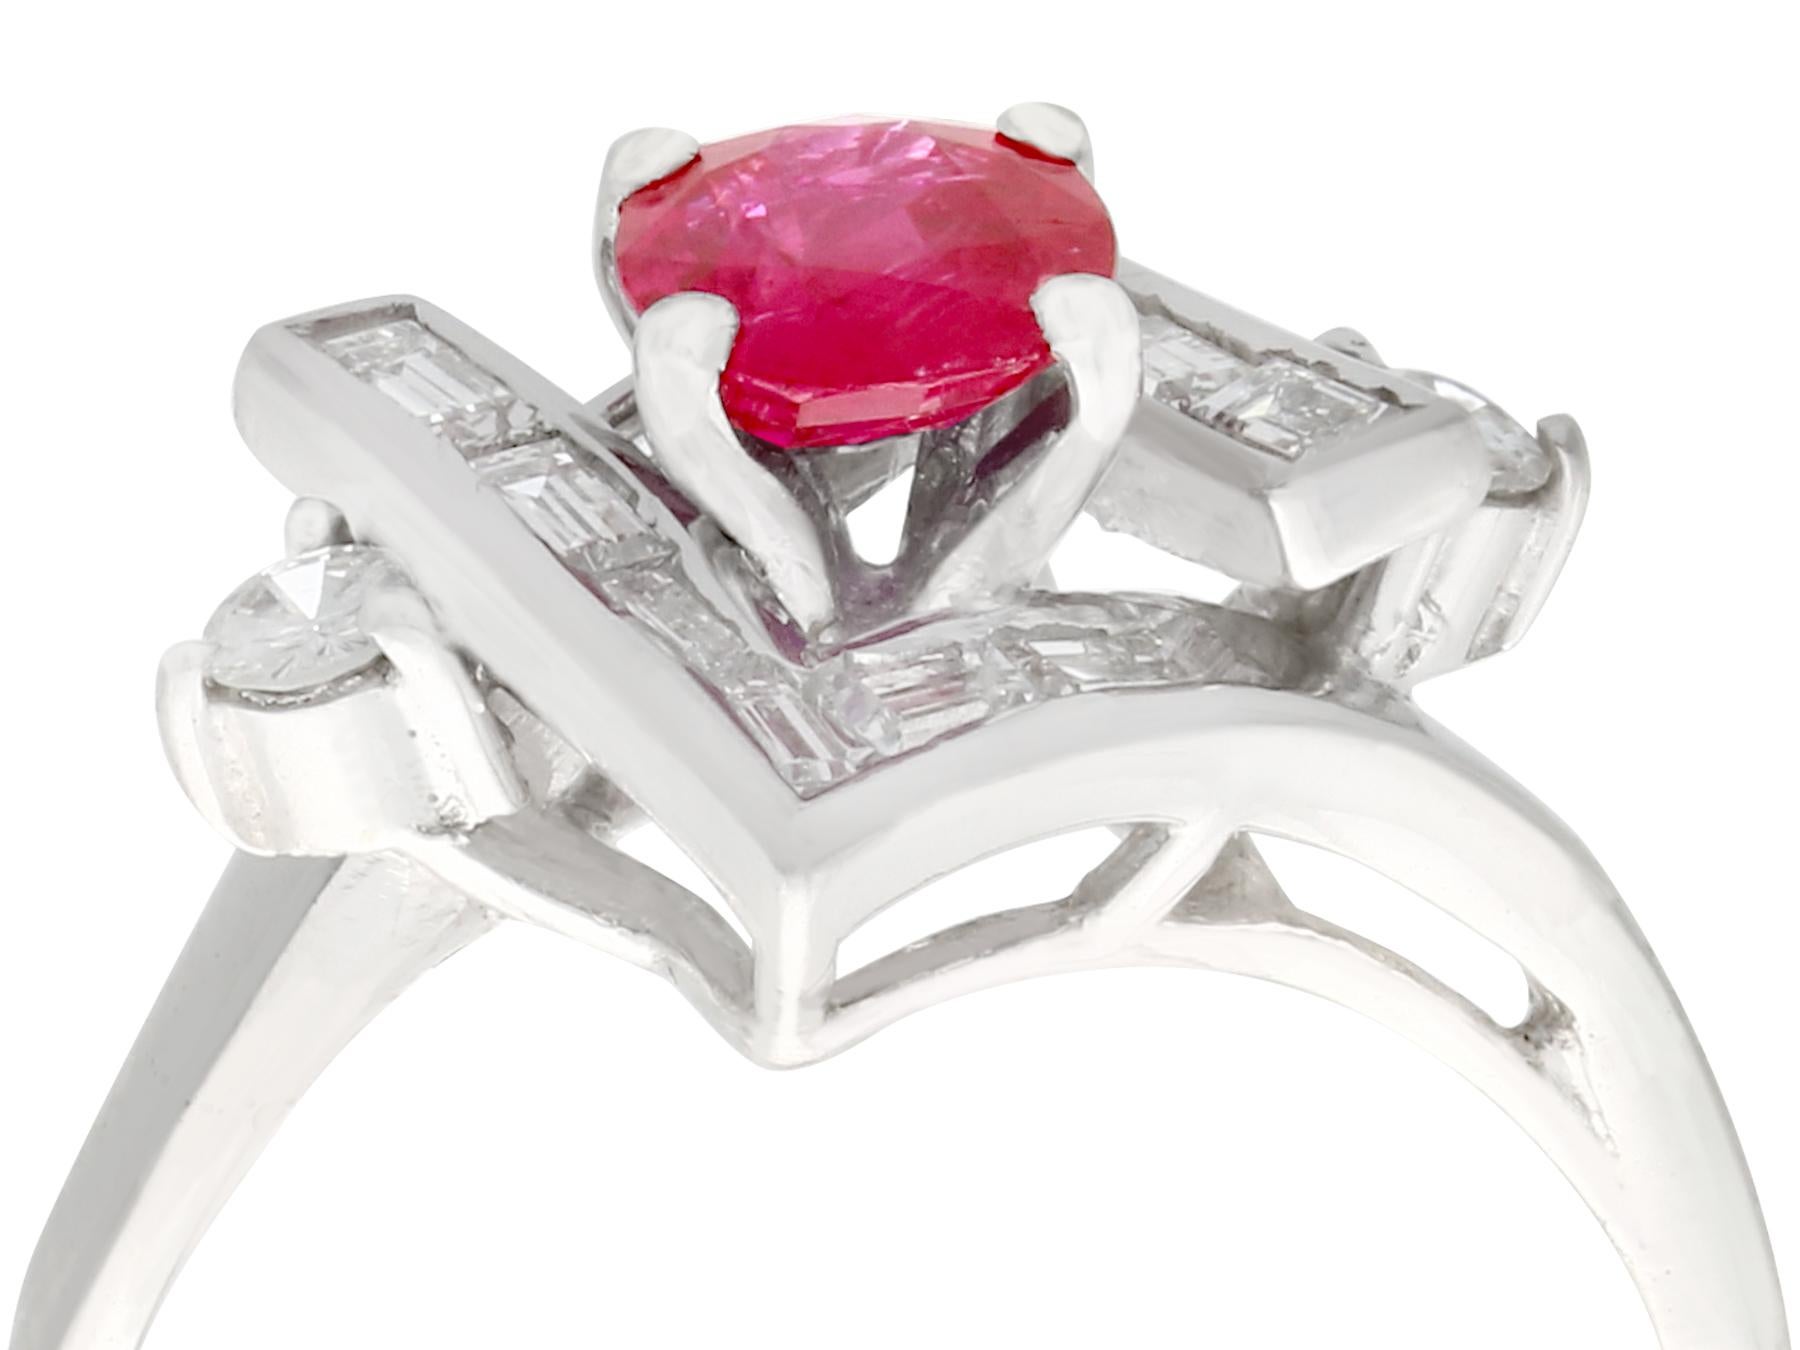 A fine and impressive 0.94 carat ruby and 0.60 carat diamond 18 karat white gold dress ring; part of our diverse vintage jewelry and collections.

This fine and impressive vintage ruby ring has been crafted in 18k white gold.

The substantial, Art